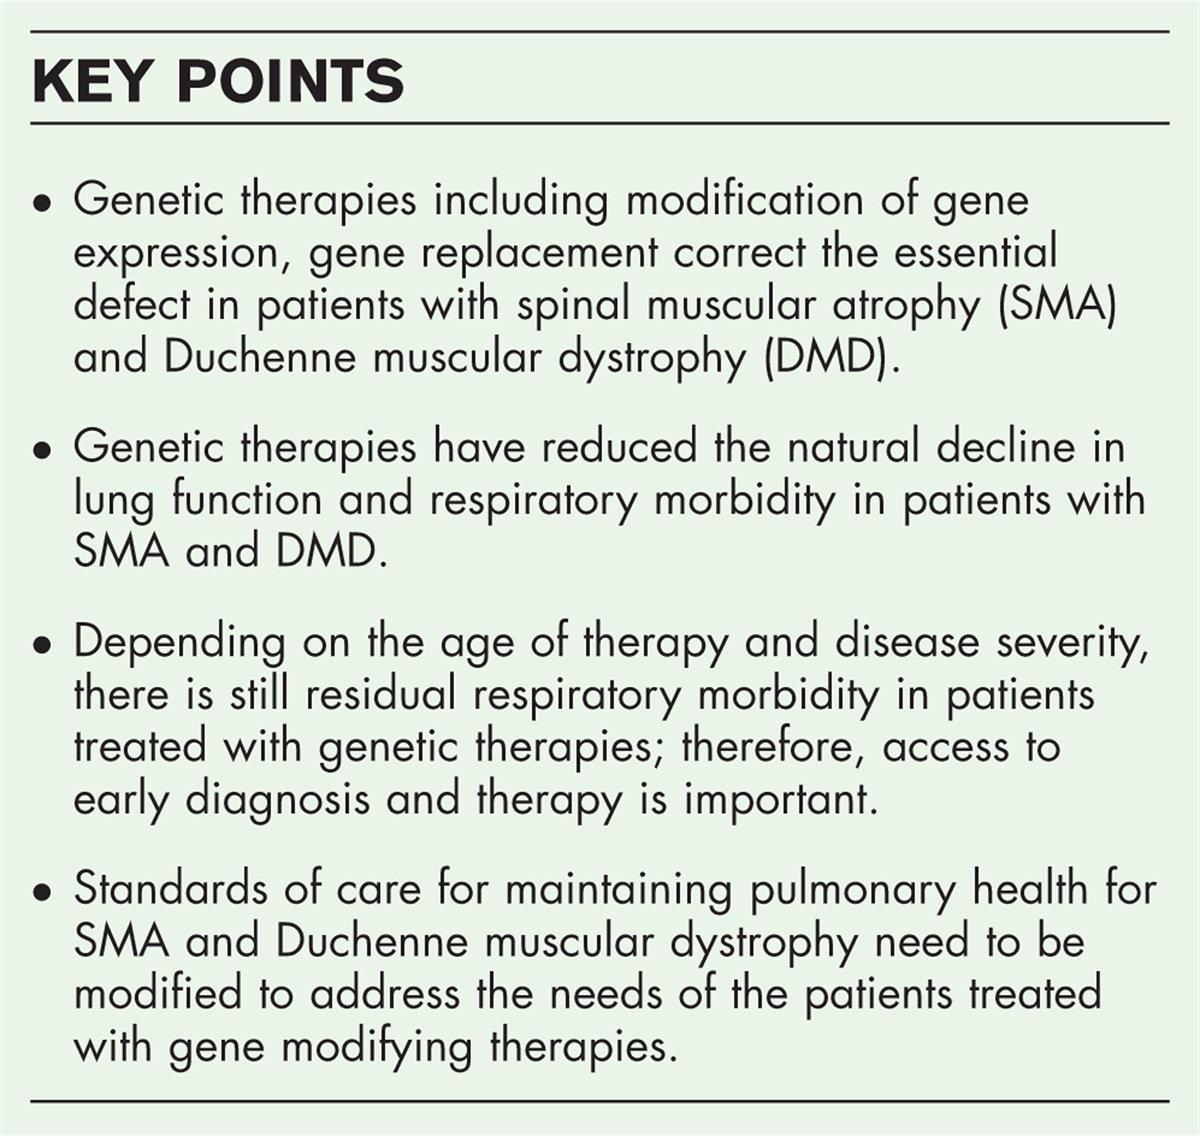 Genetic therapies and respiratory outcomes in patients with neuromuscular disease